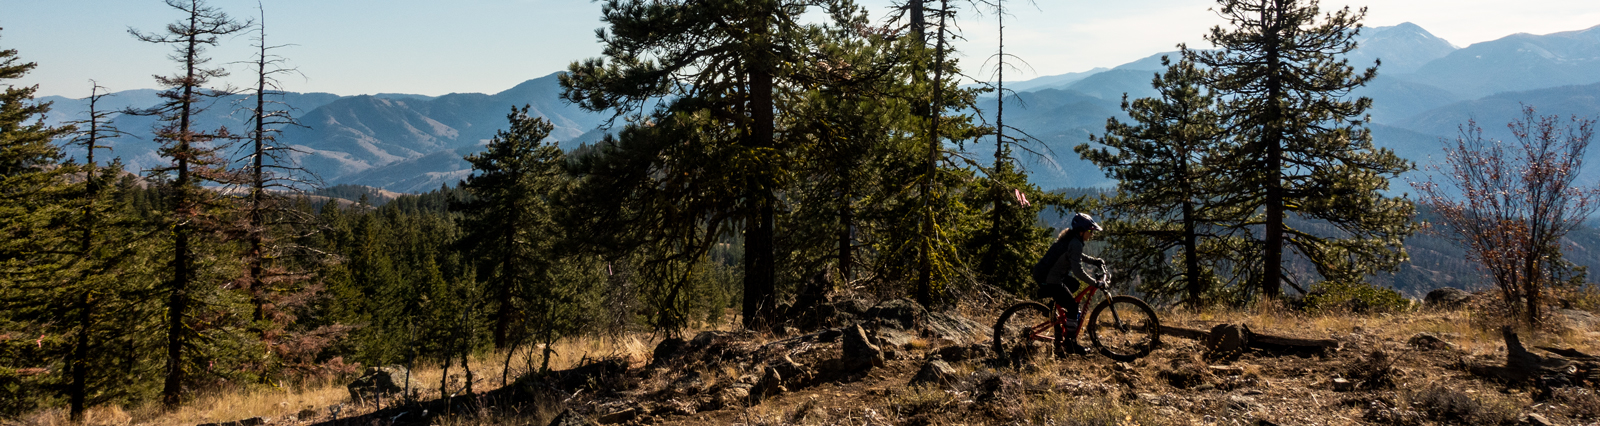 The Essential Guide for Beginner Mountain Bikers in Washington